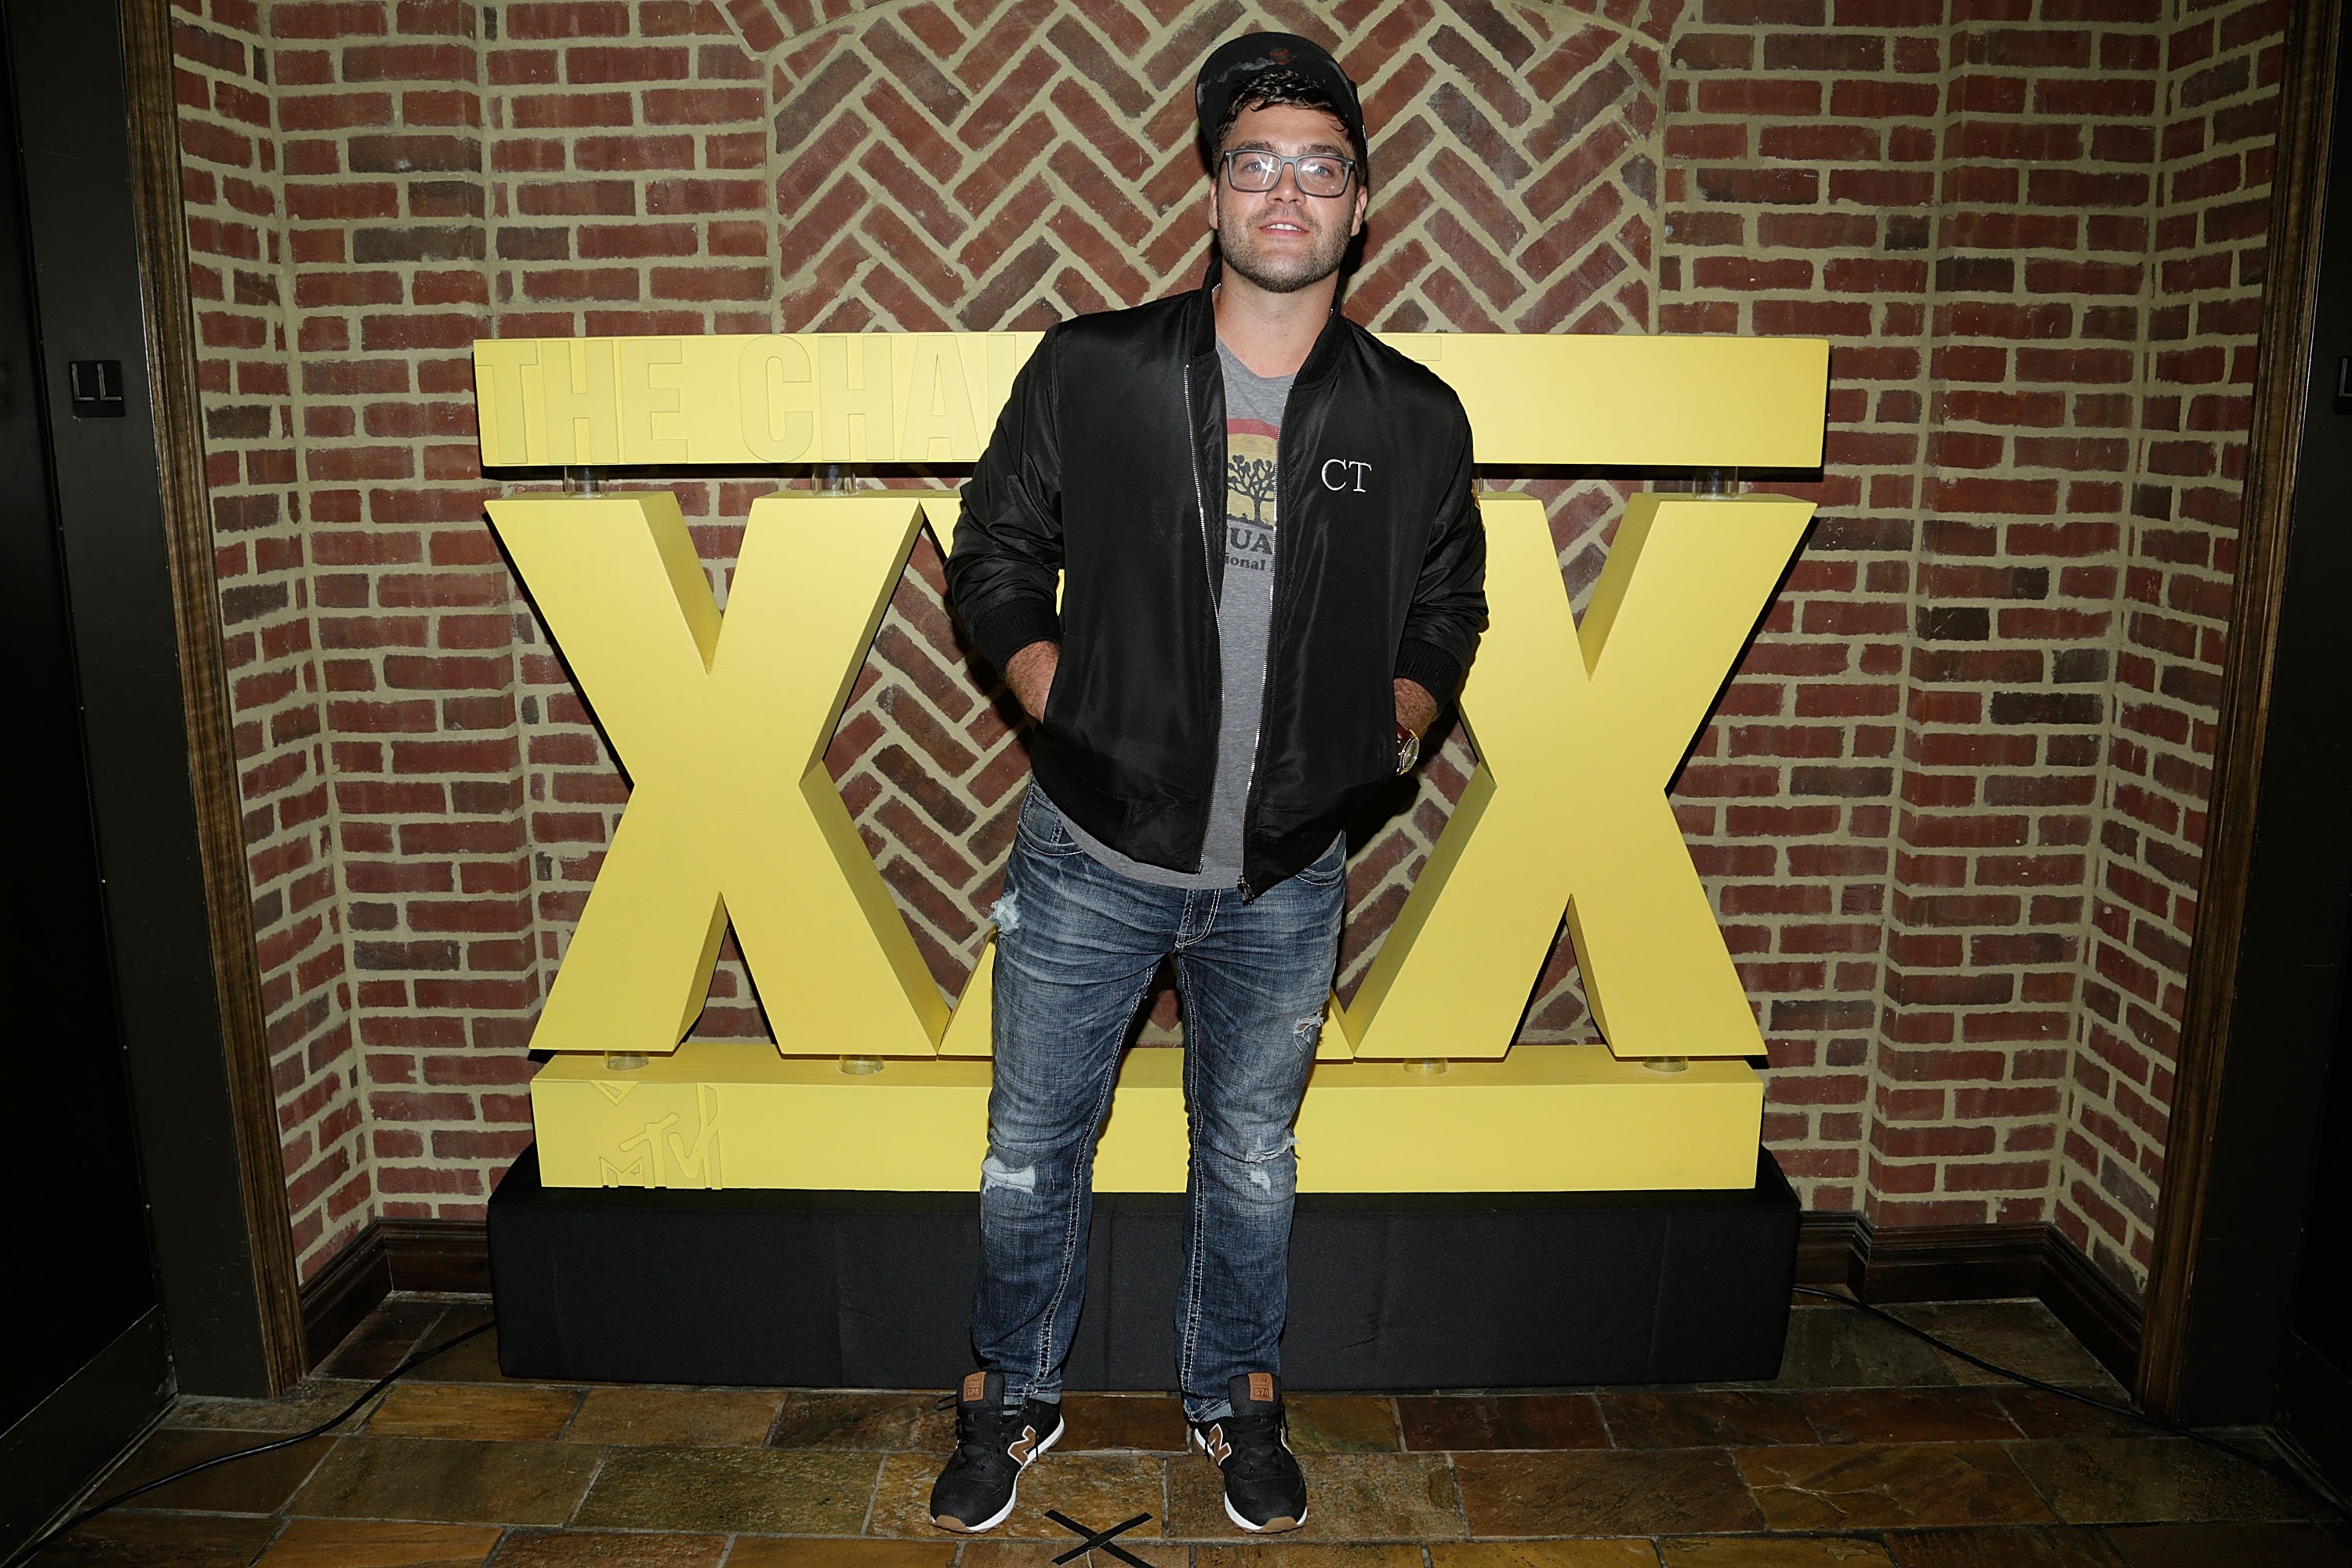 Chris "CT" Tamburello attends The Challenge XXX: Ultimate Fan Experience Q & A and Reception at the Roxy Hotel on July 17, 2017